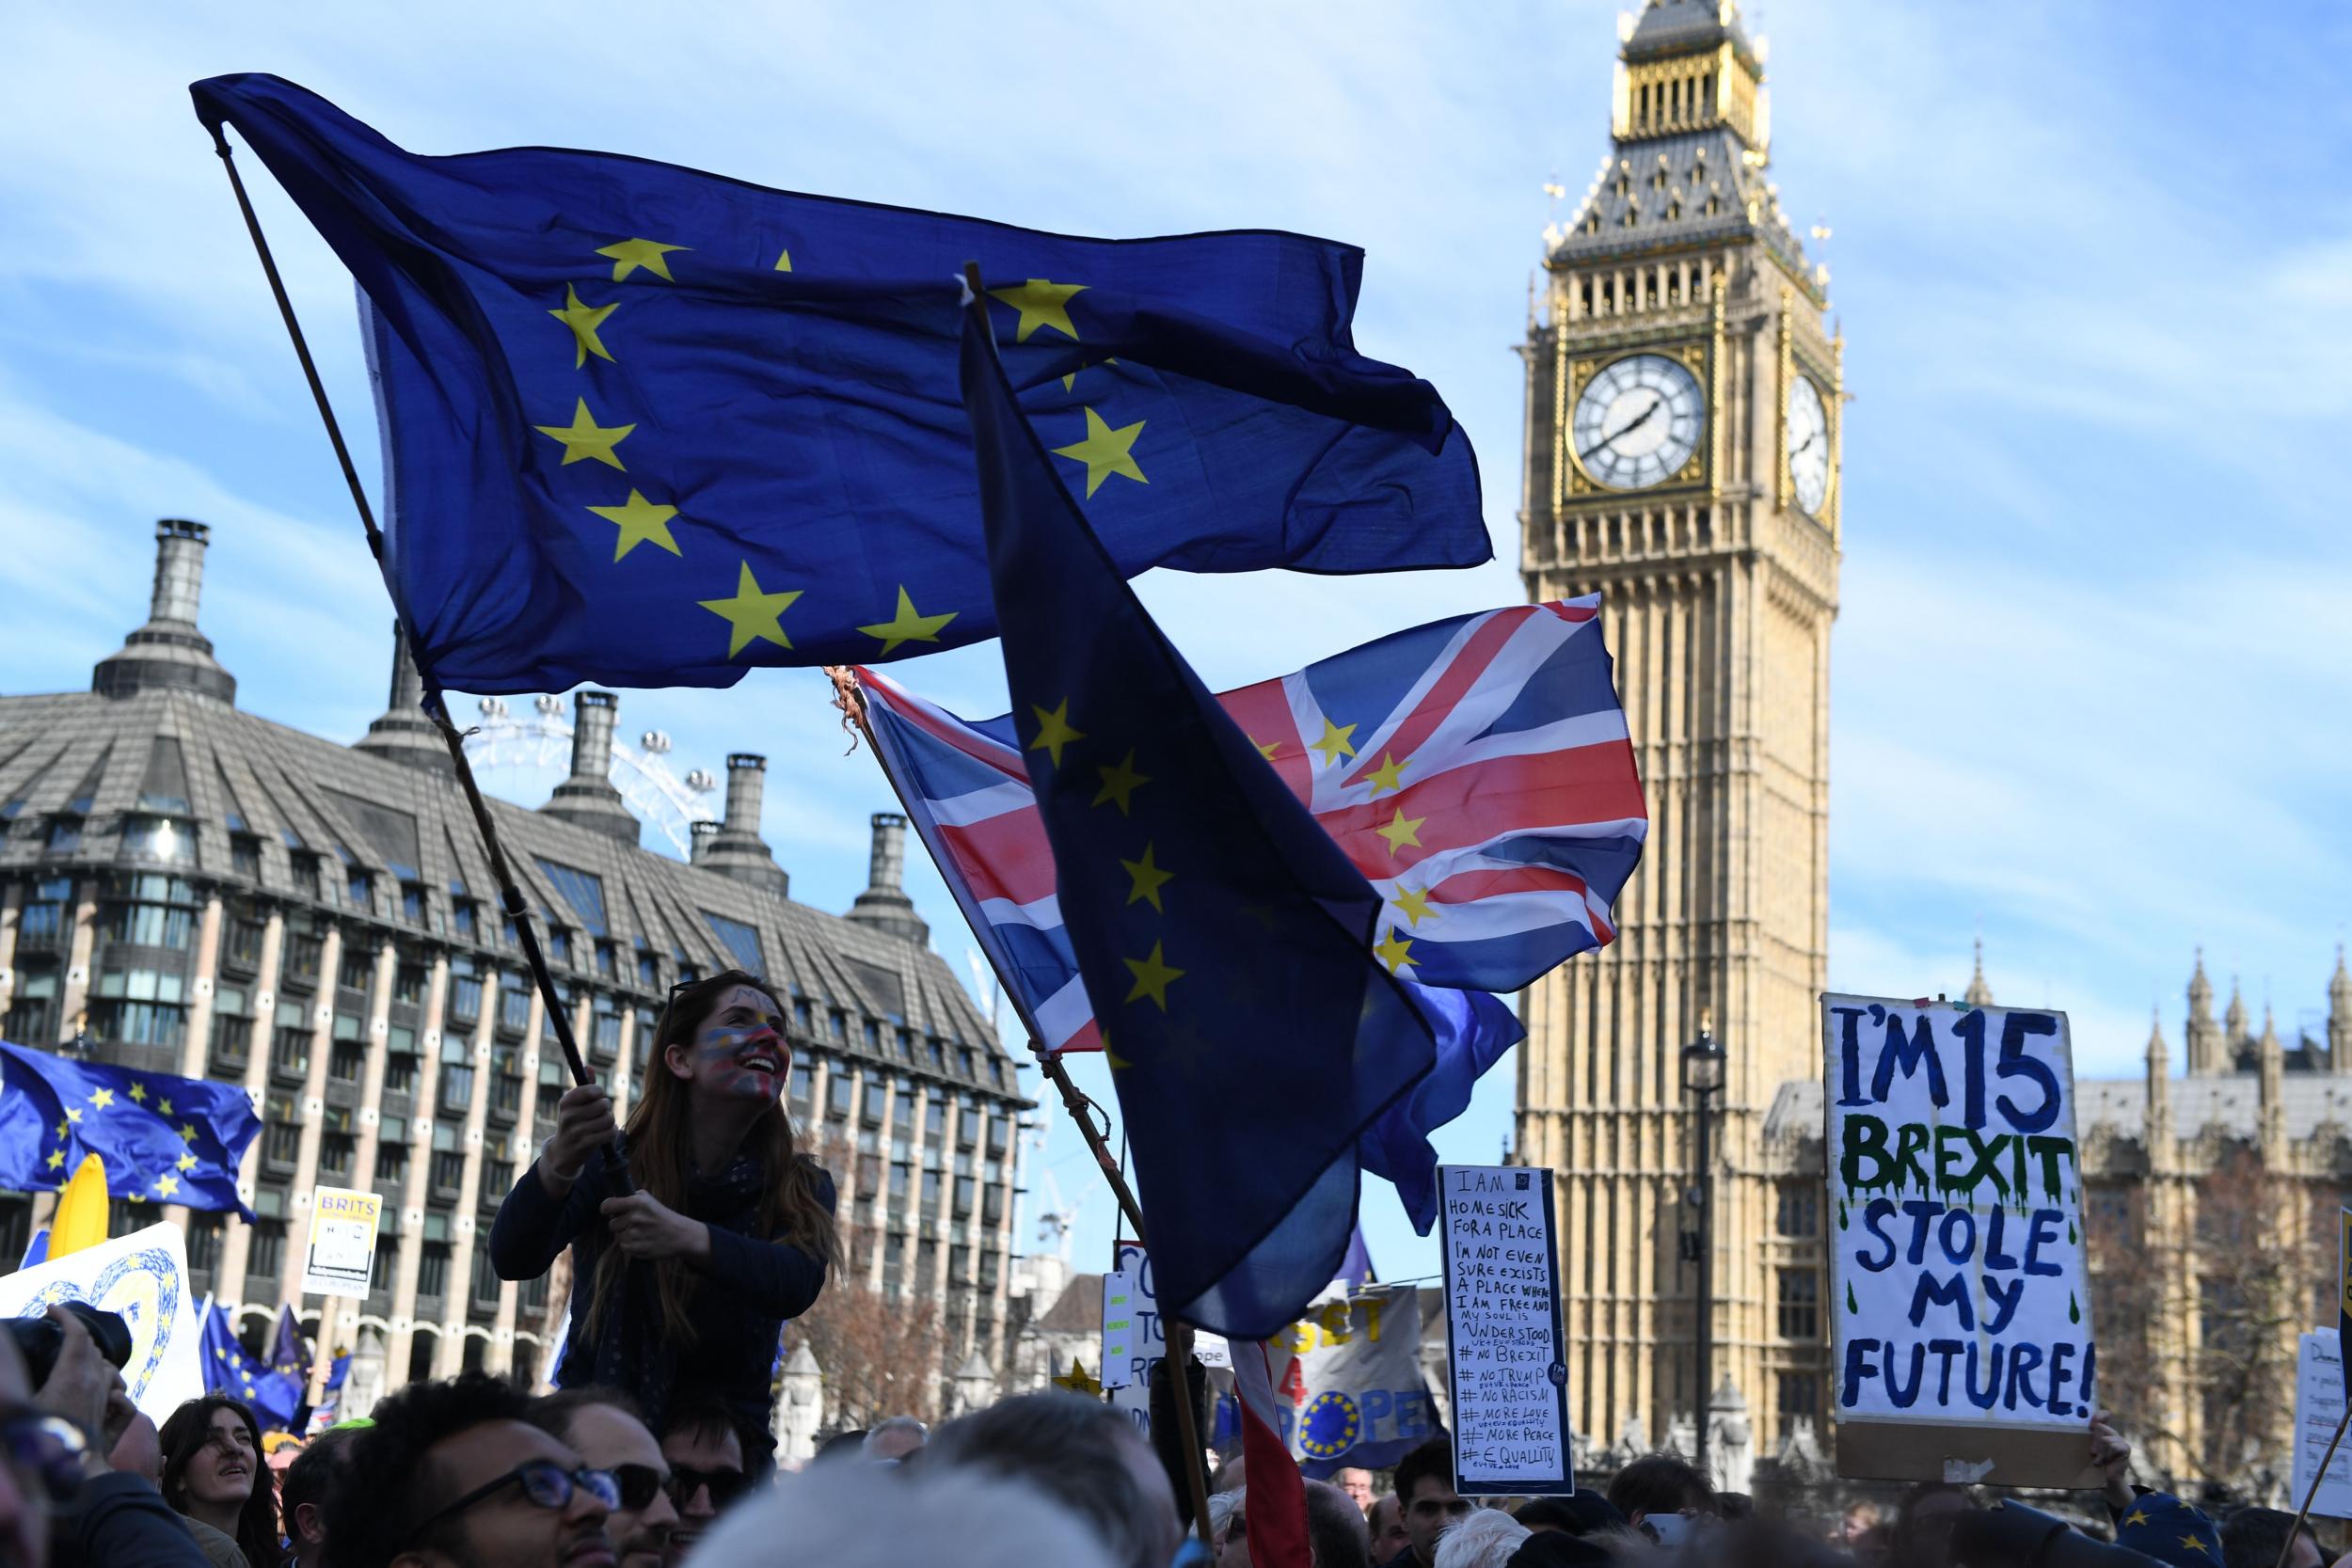 Demonstrators wave EU flags and Union Flags in Parliament Square